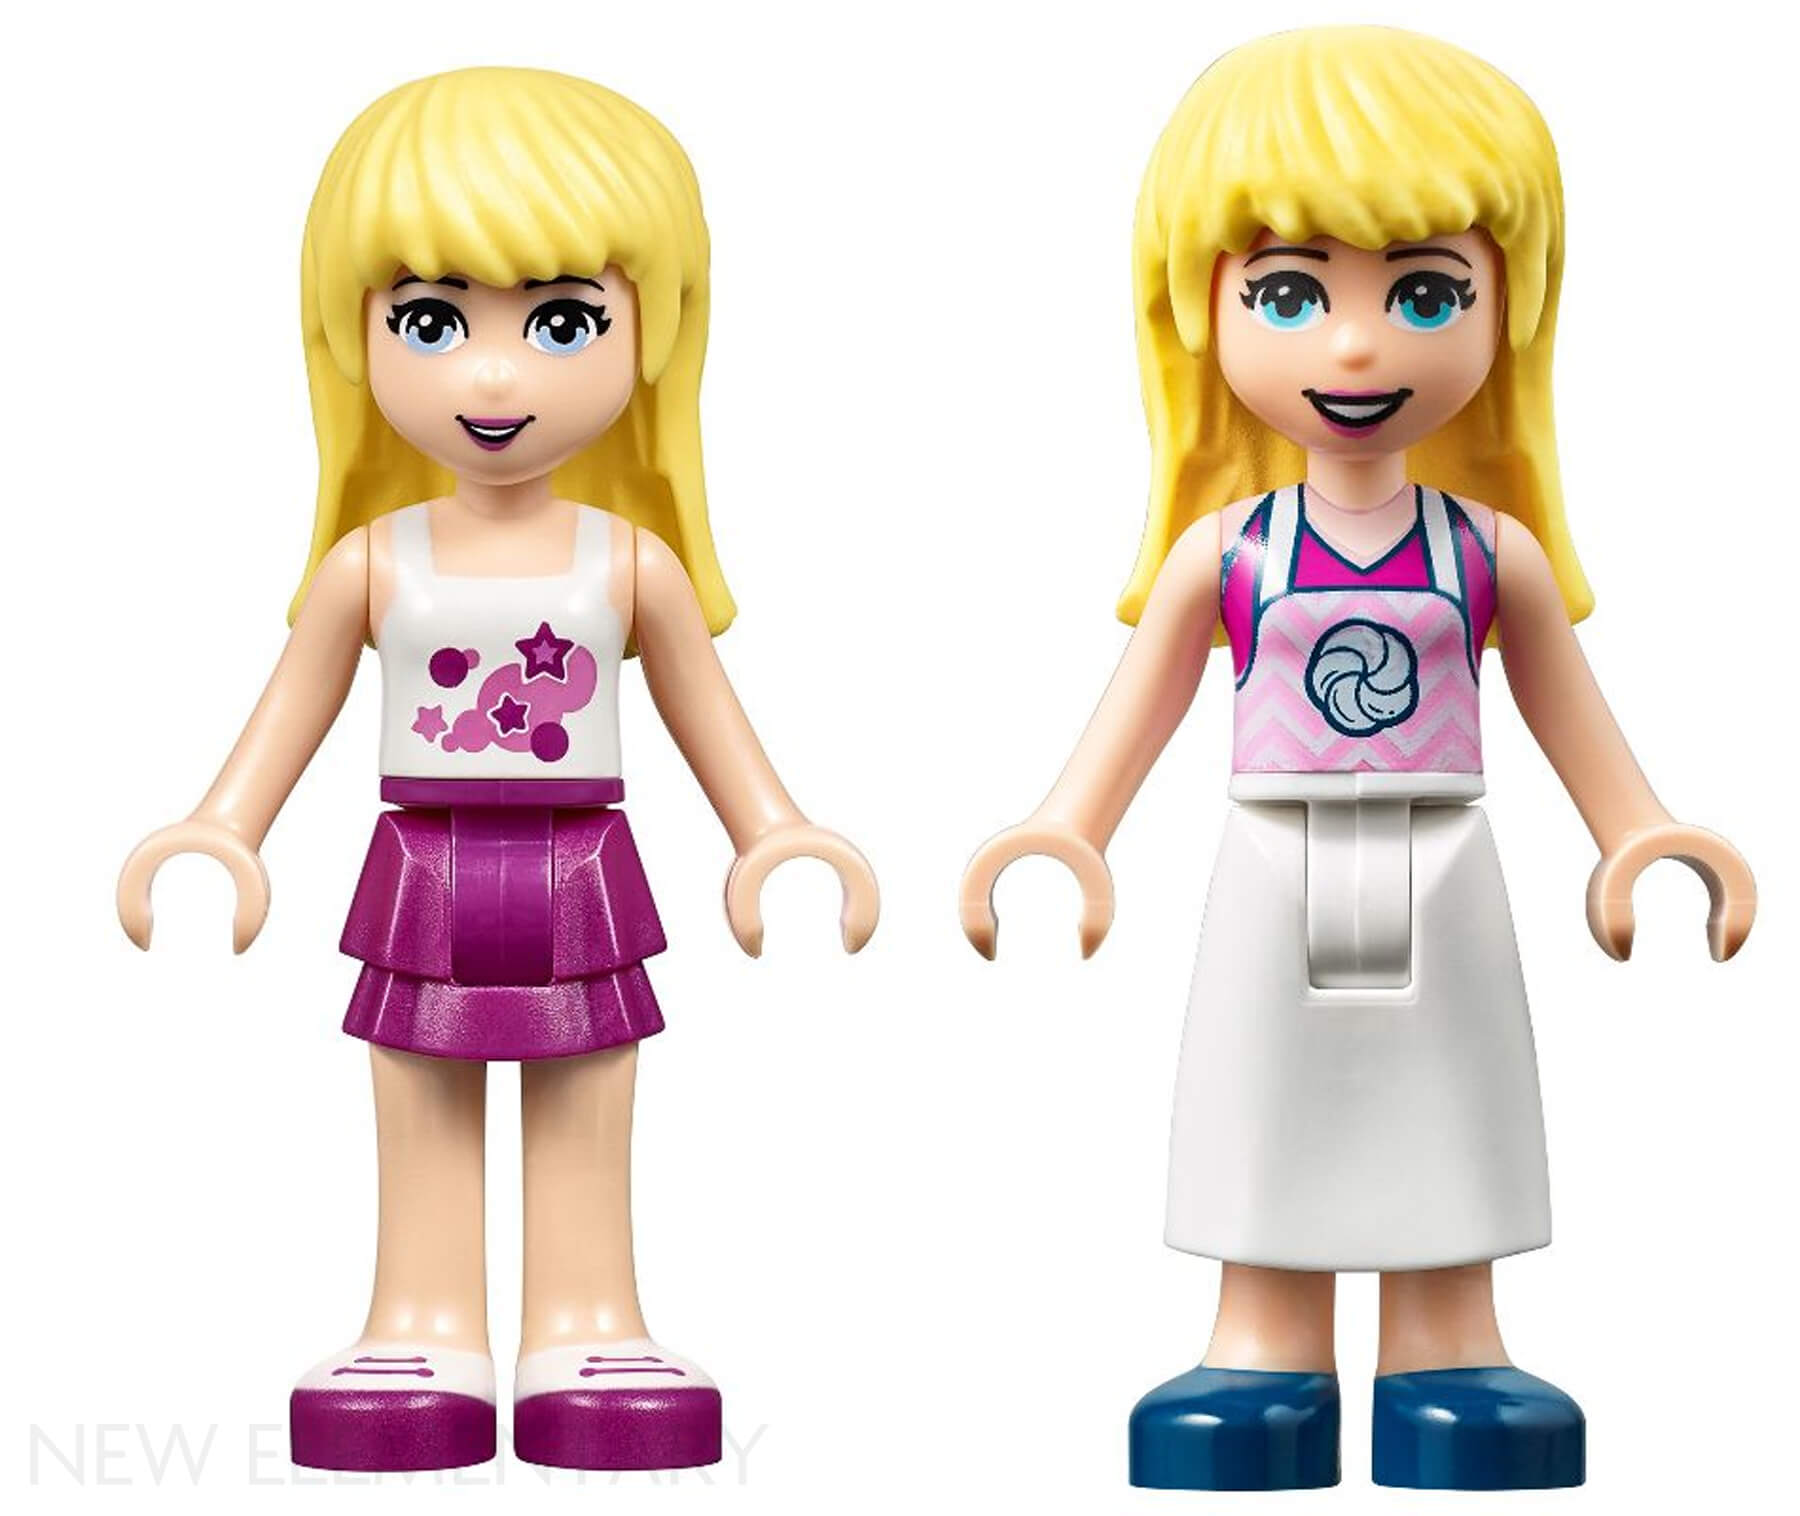 Old Elementary: 10 years of LEGO® Friends  New Elementary: LEGO® parts,  sets and techniques